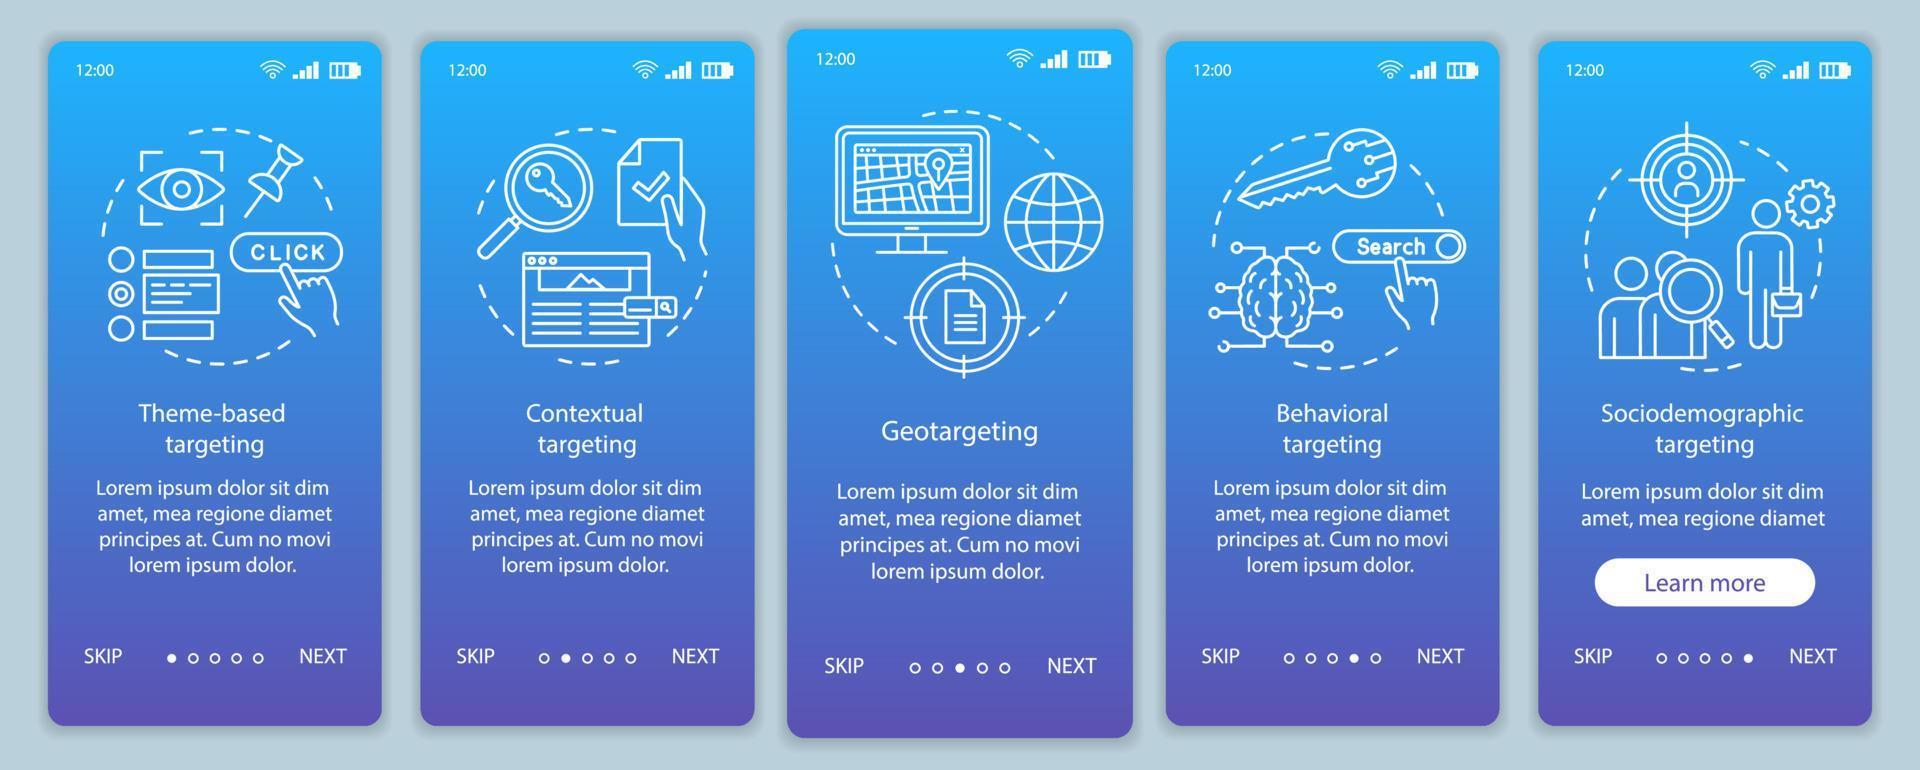 Targeting types blue gradient onboarding mobile app page screen vector template. Targeted advertising walkthrough website steps with linear illustrations. UX, UI, GUI smartphone interface concept